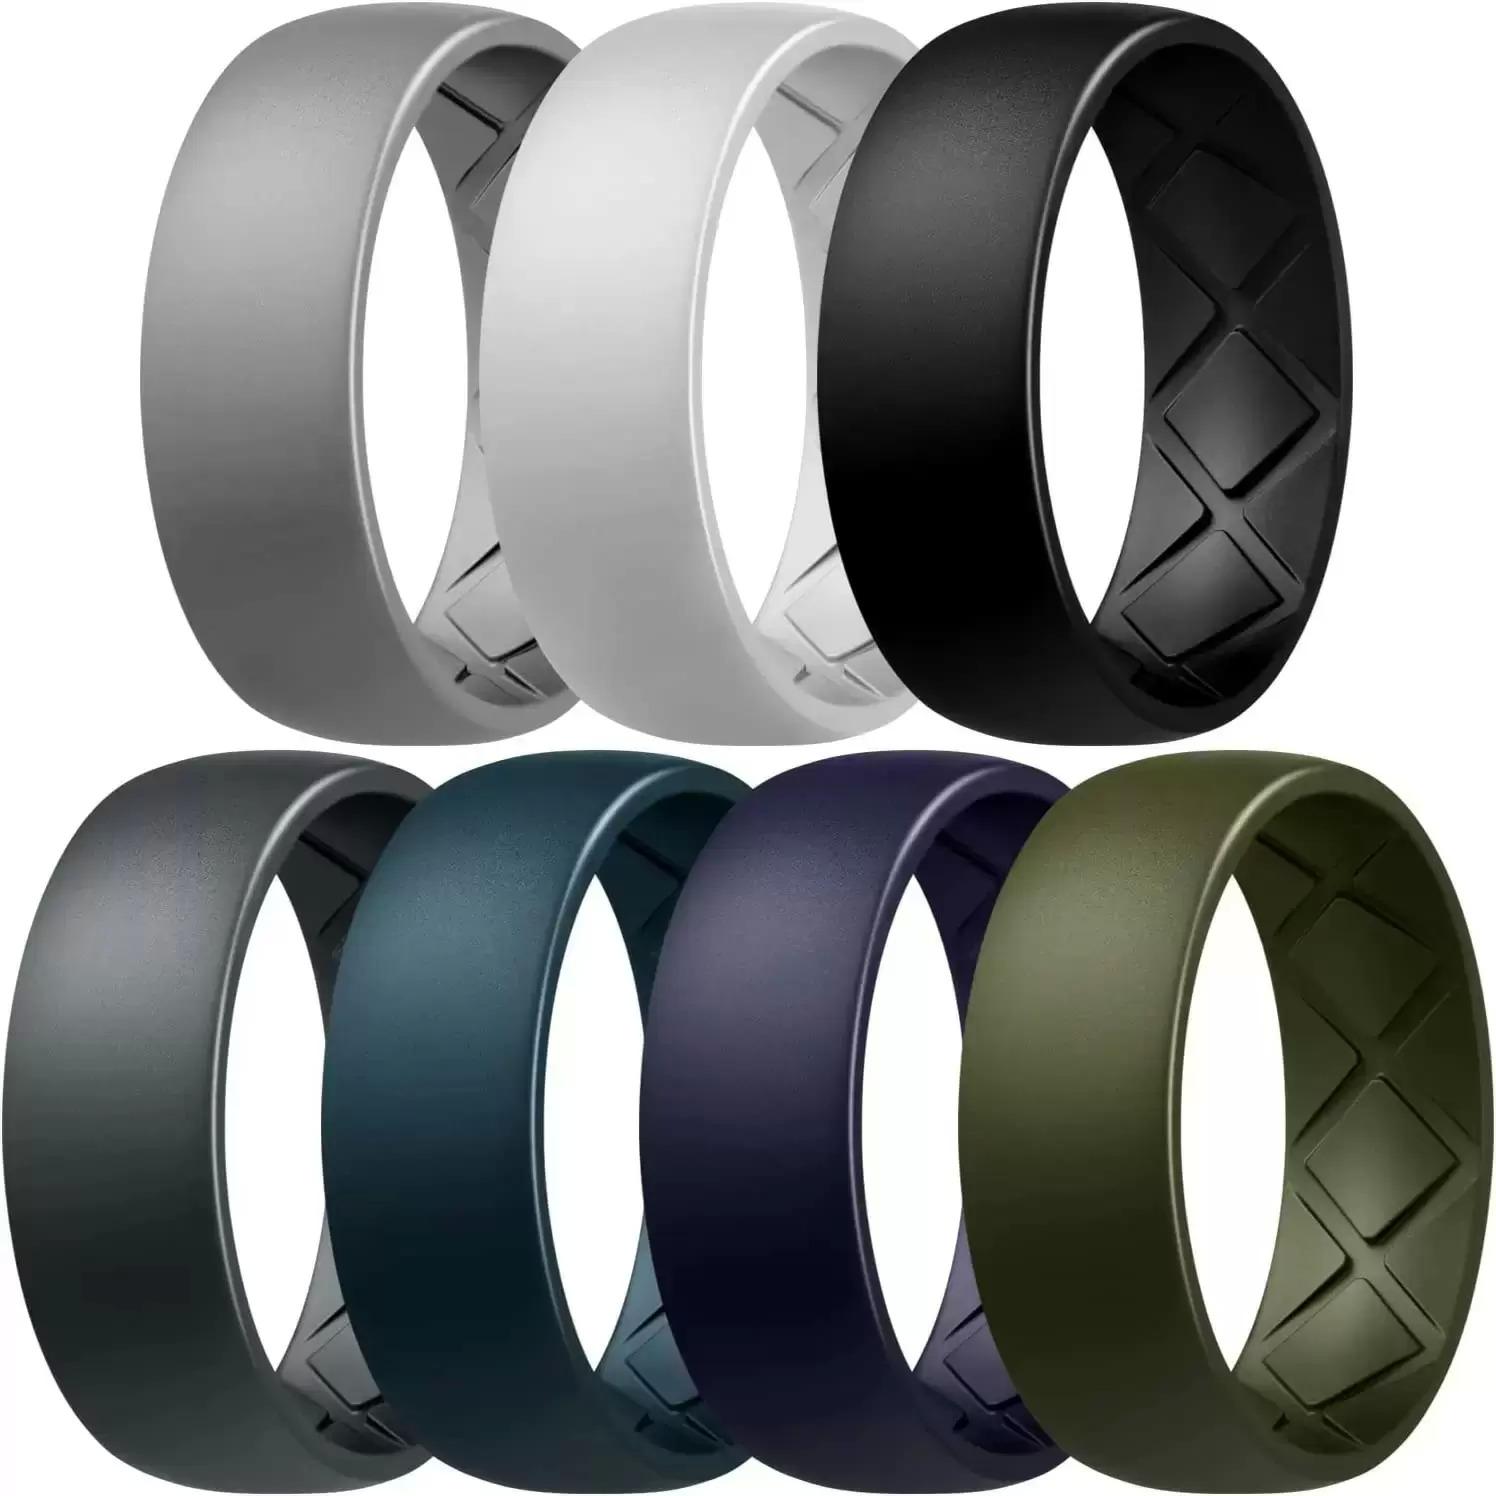 7 Egnaro Silicone Rings for Men for $5.99